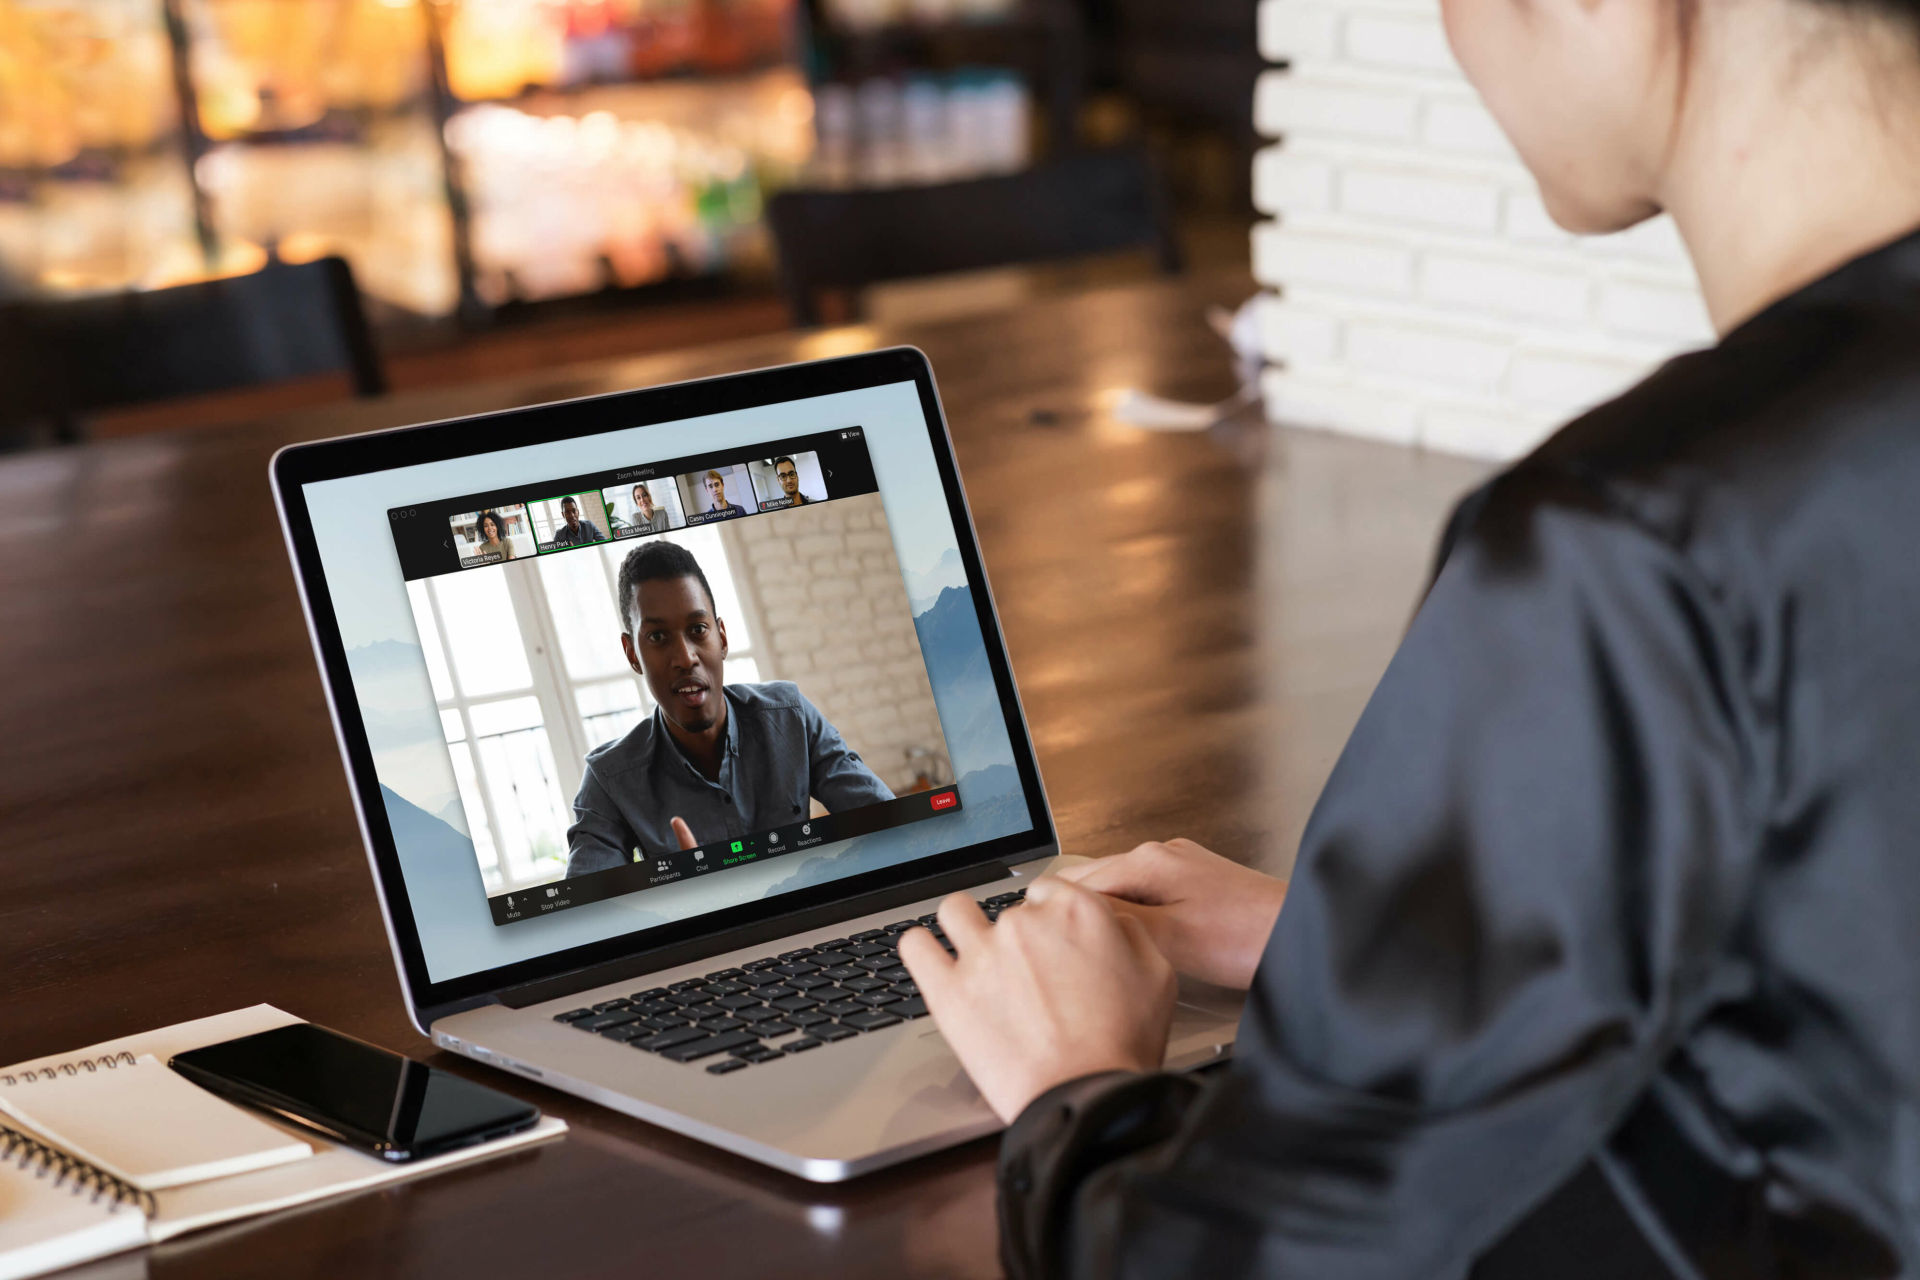 Image of a woman participating in a video conference call on a laptop